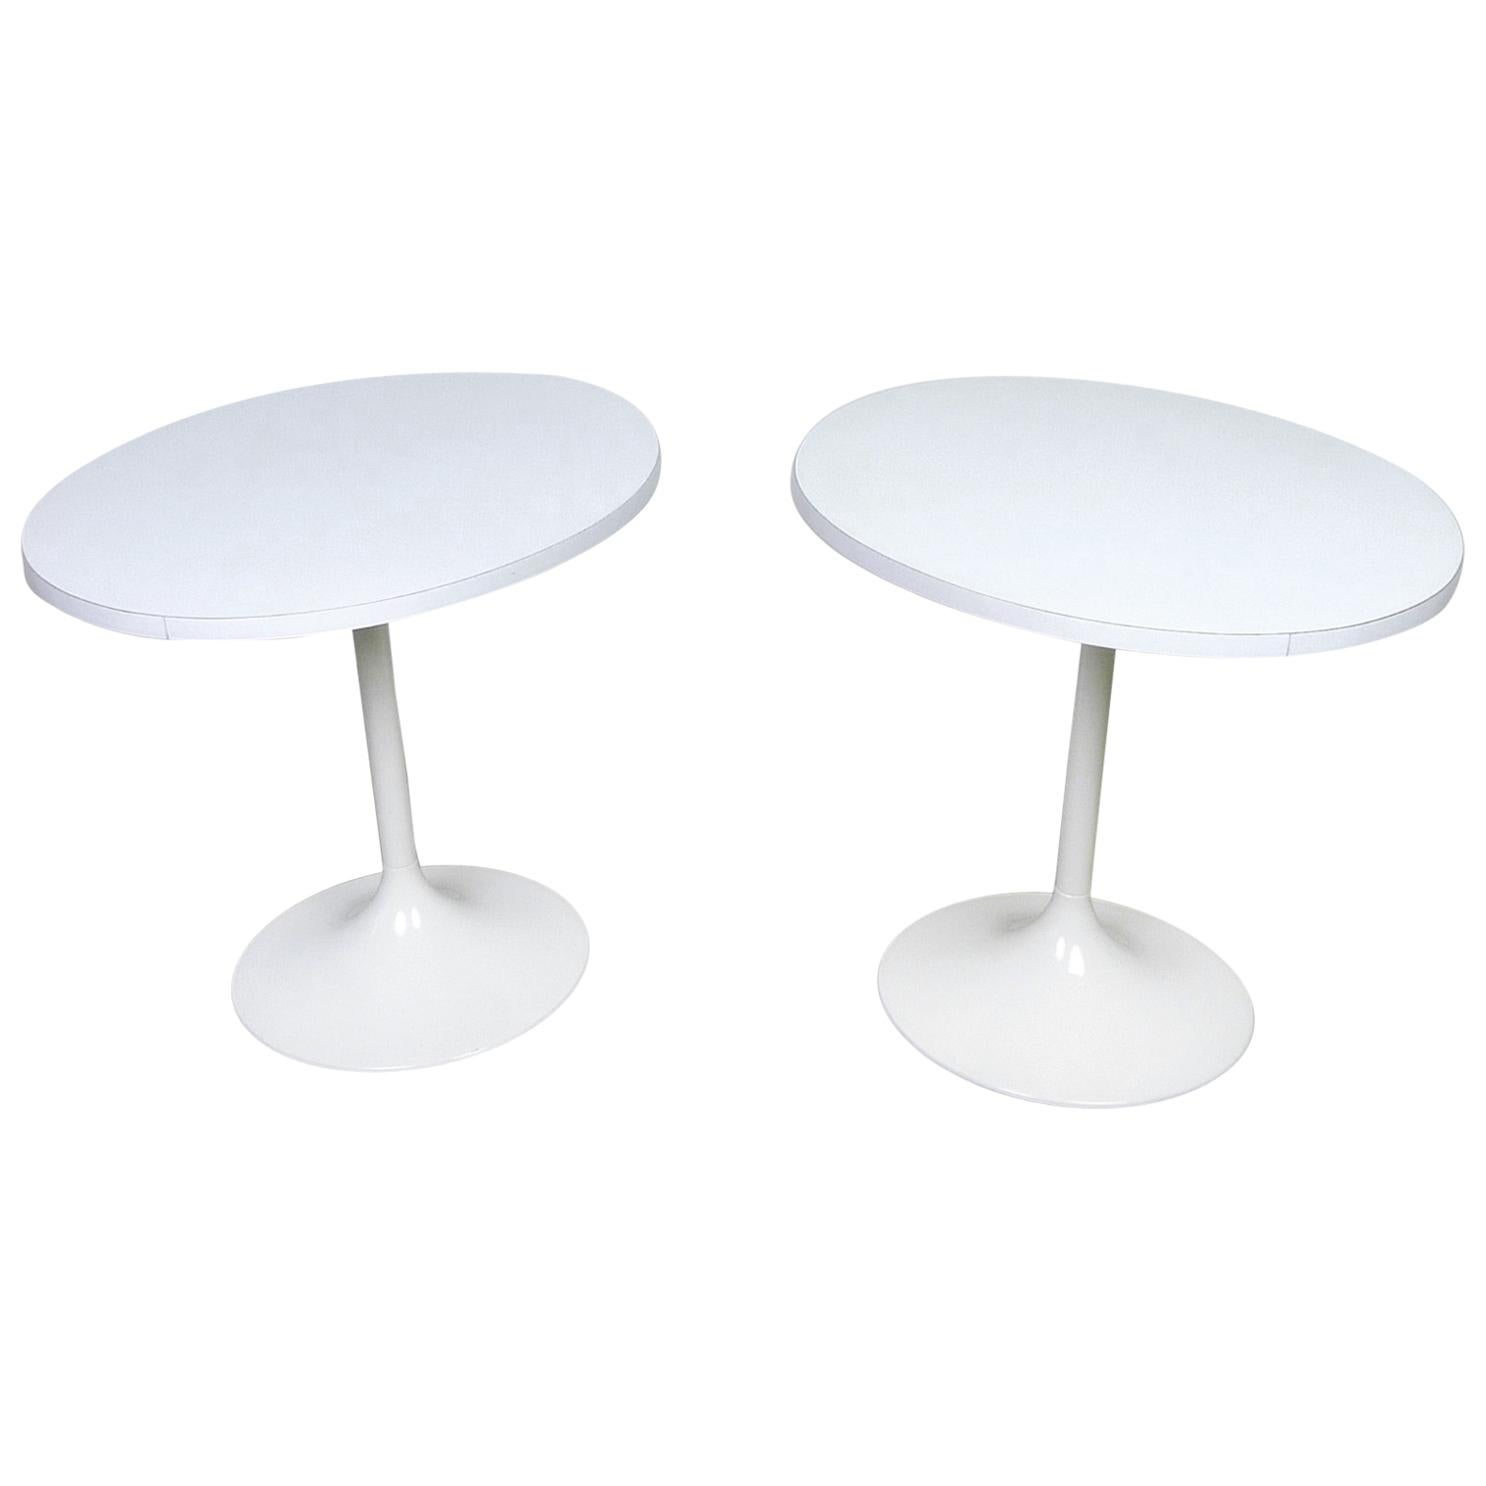 Pair of Oval Side Tables with Tulip Bases, Germany, 1970s For Sale